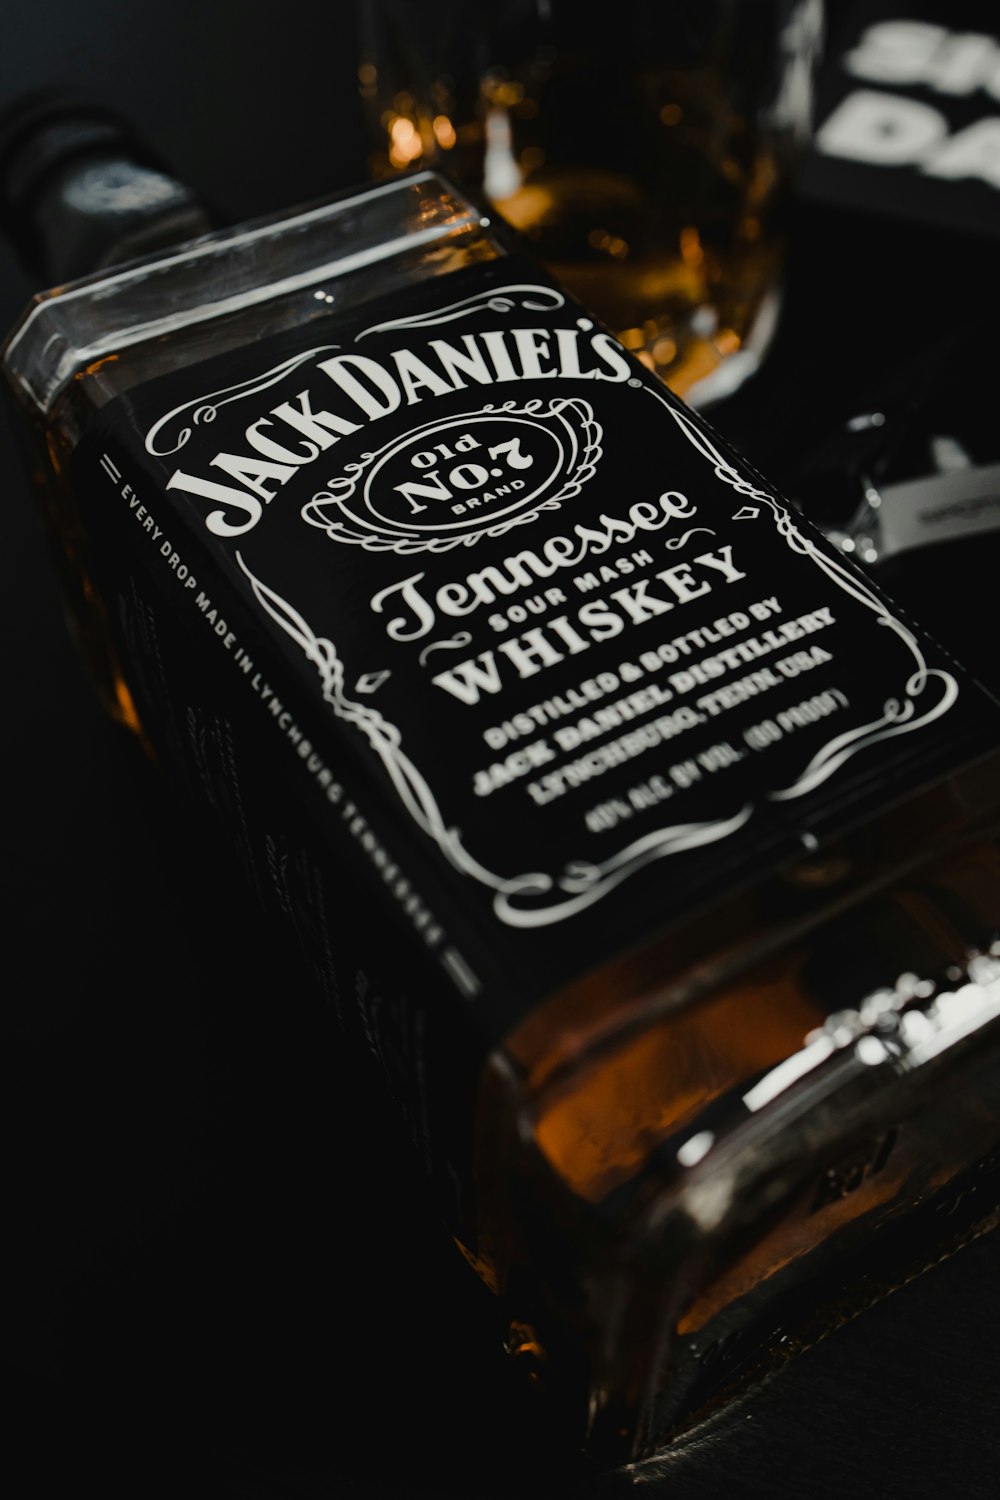 jack daniels old no 7 tennessee whiskey